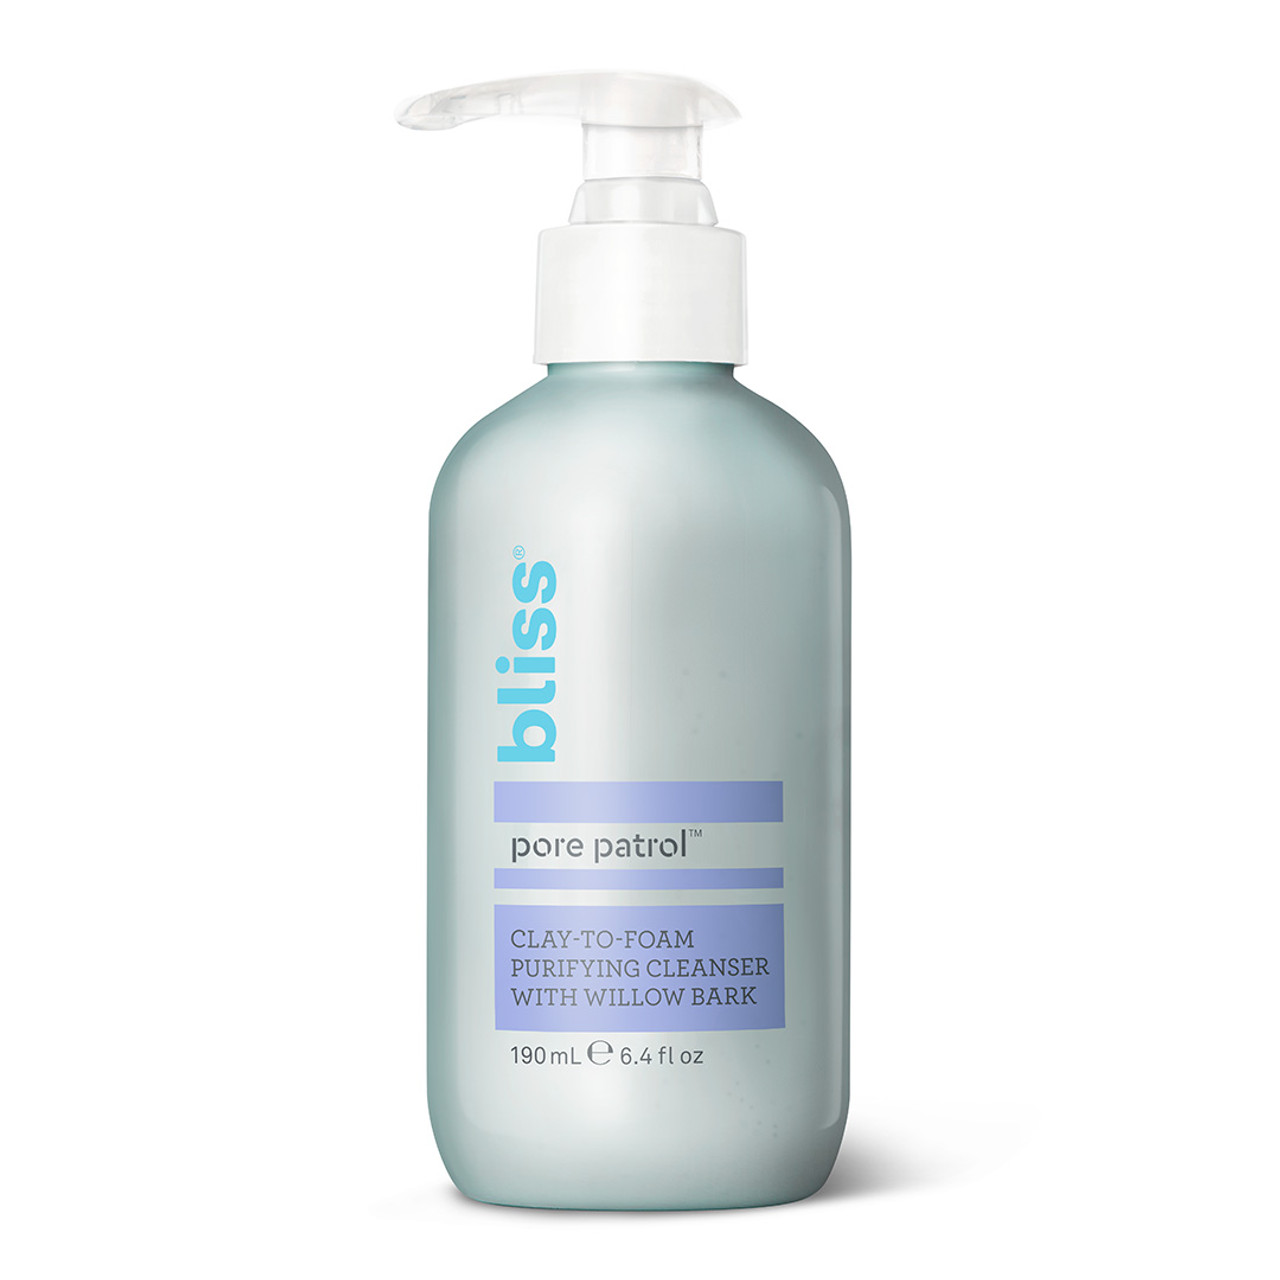 bliss foaming face wash